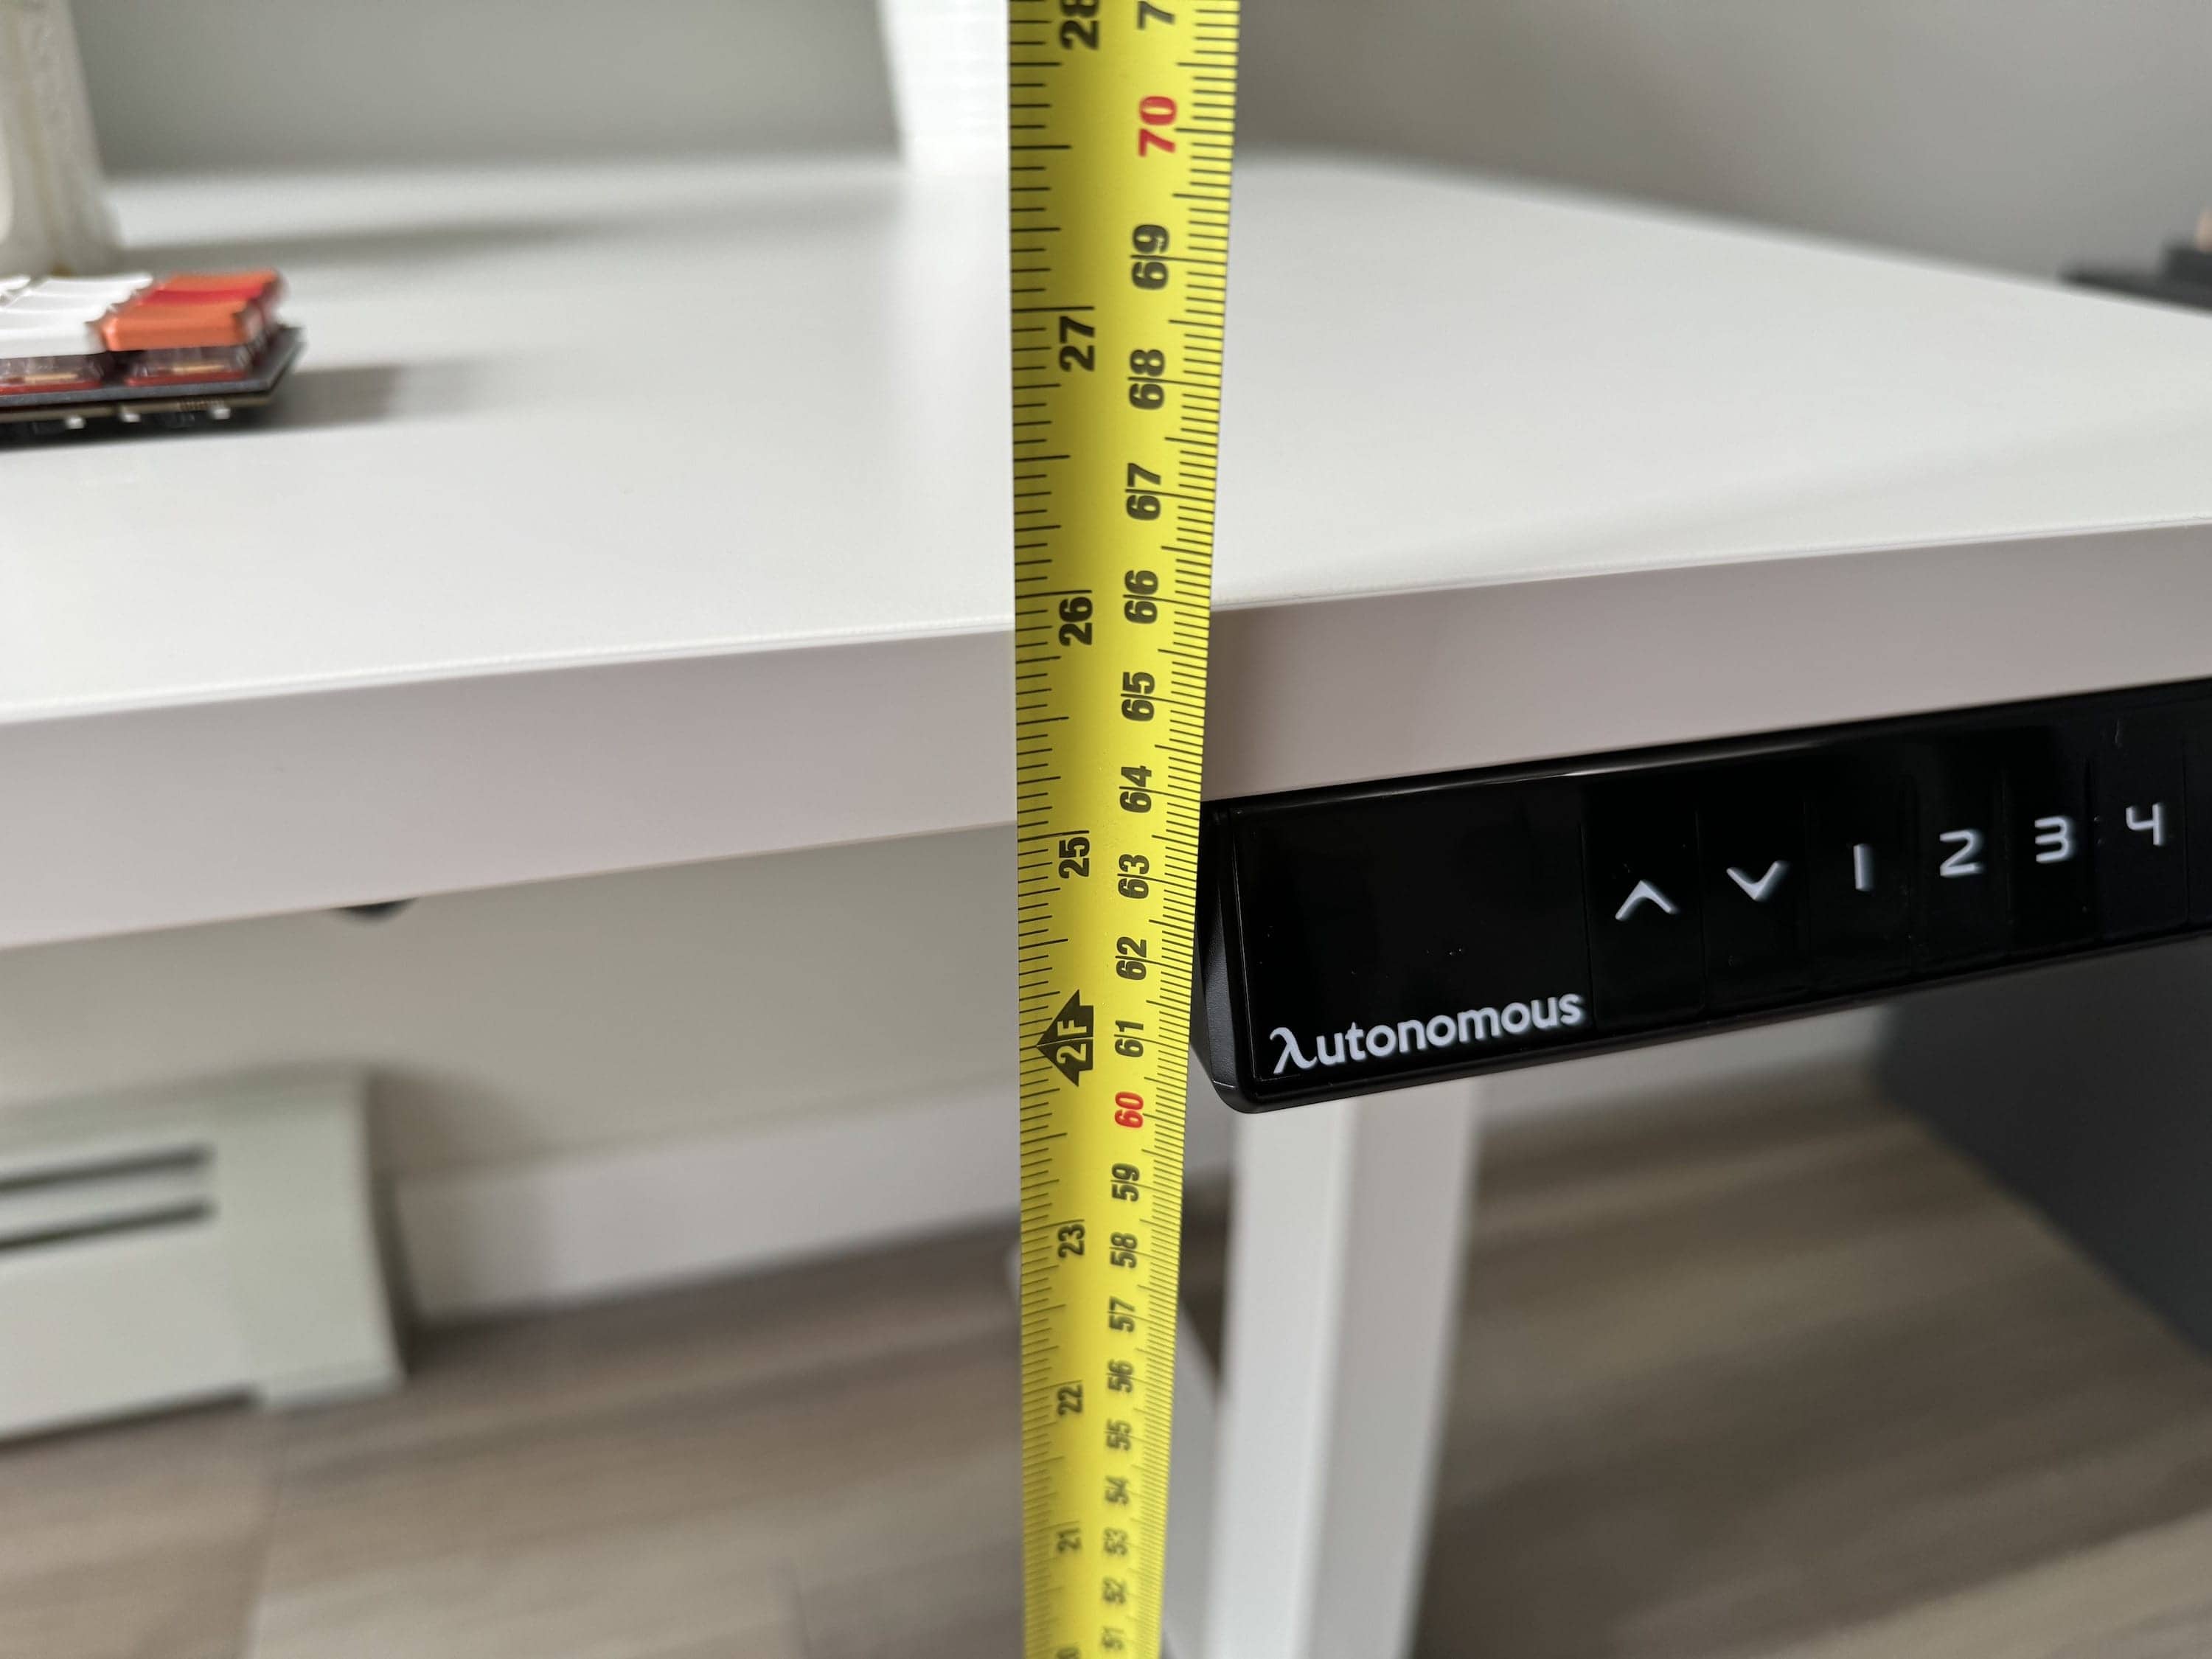 Measuring tape showing the Autonomous desk at 25 inches tall at its lowest position